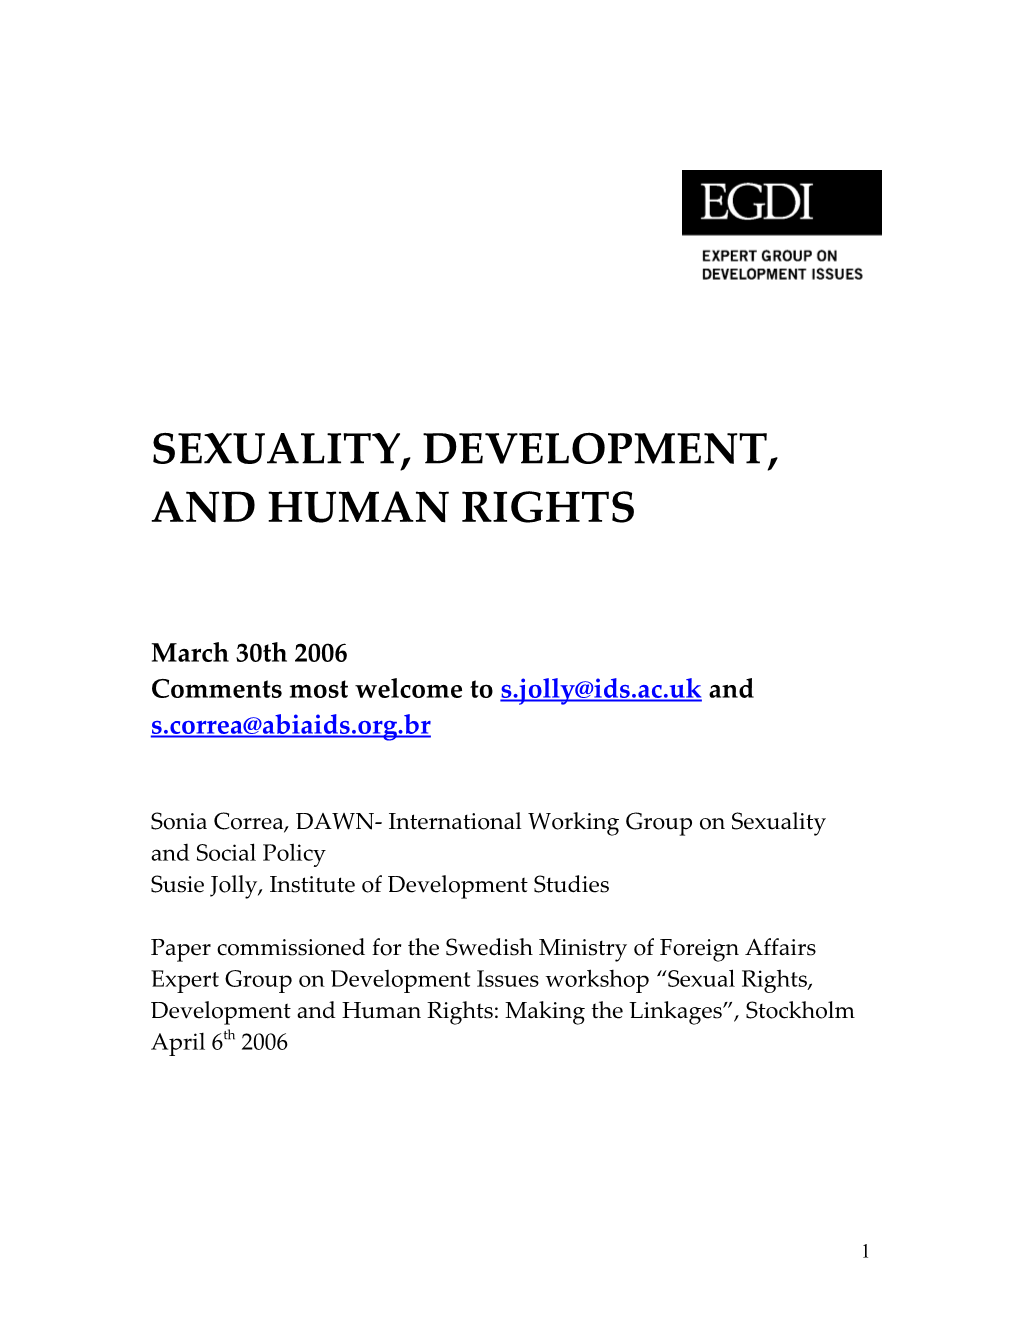 Sexuality, Development, and Human Rights